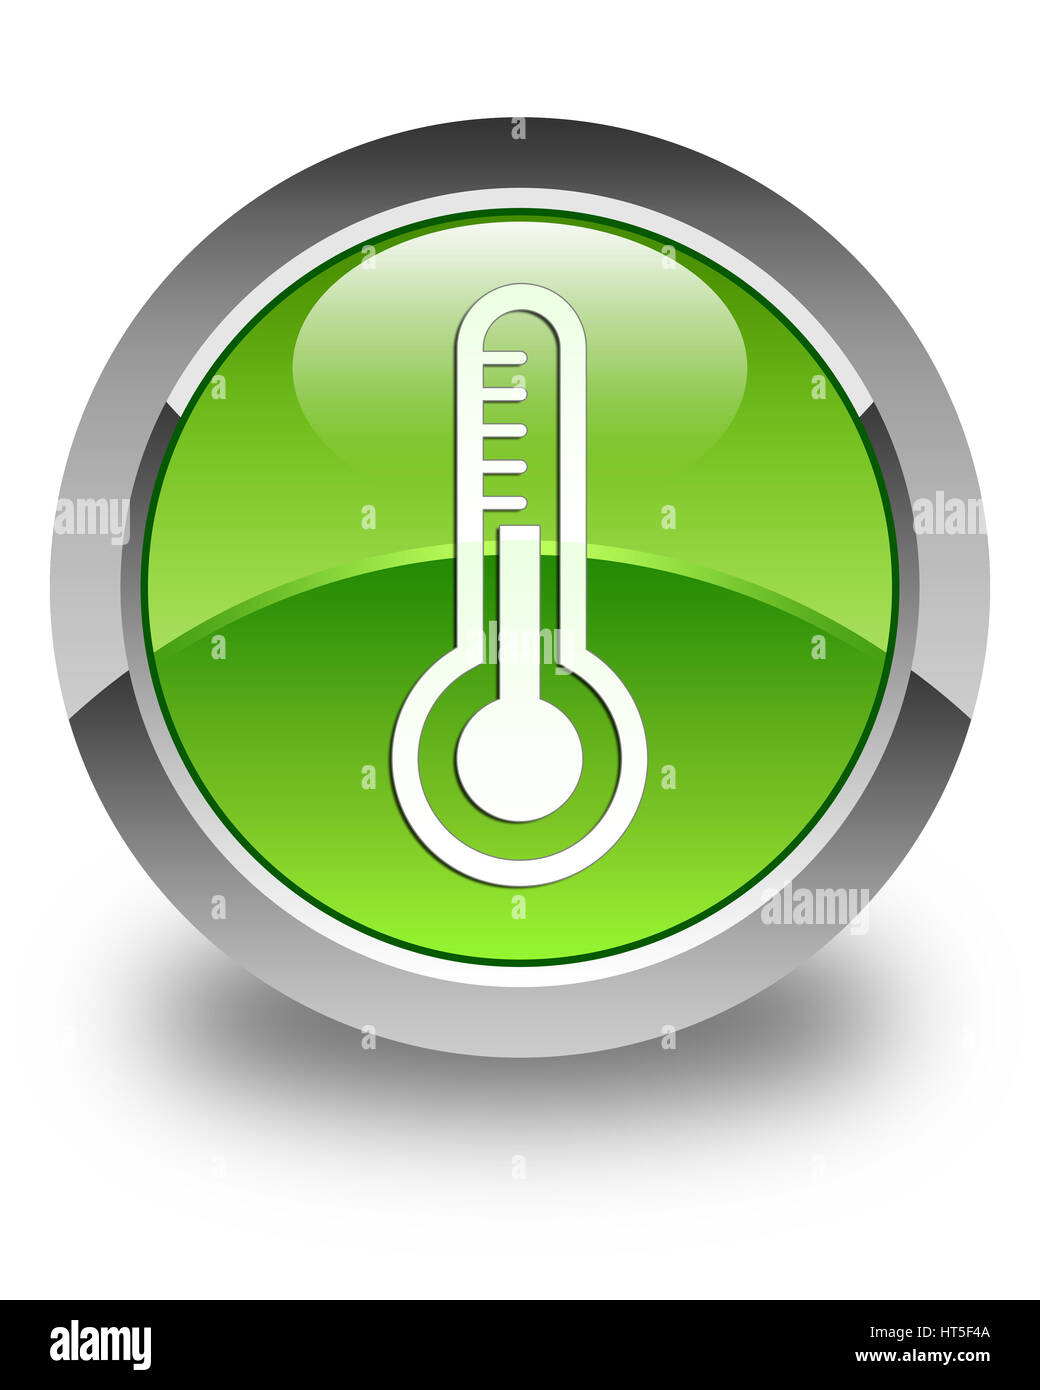 Thermometer icon isolated on glossy green round button abstract illustration Stock Photo